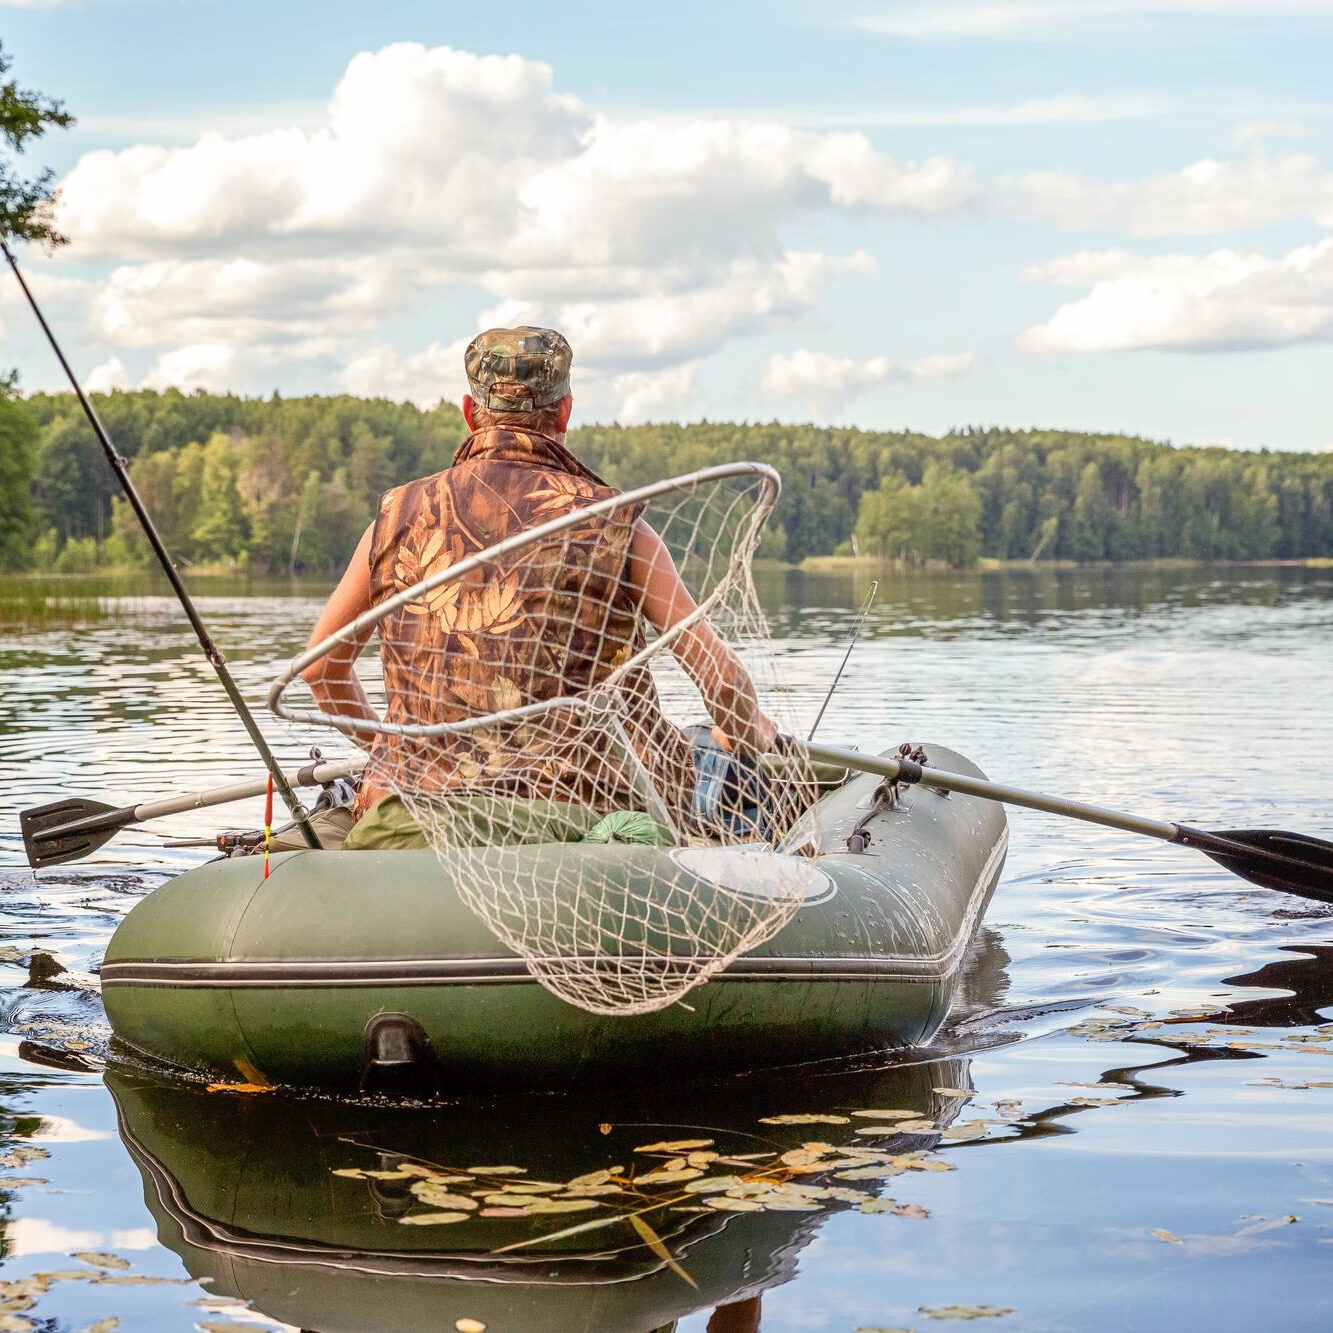 Fisherman in inflatable boat on calm lake